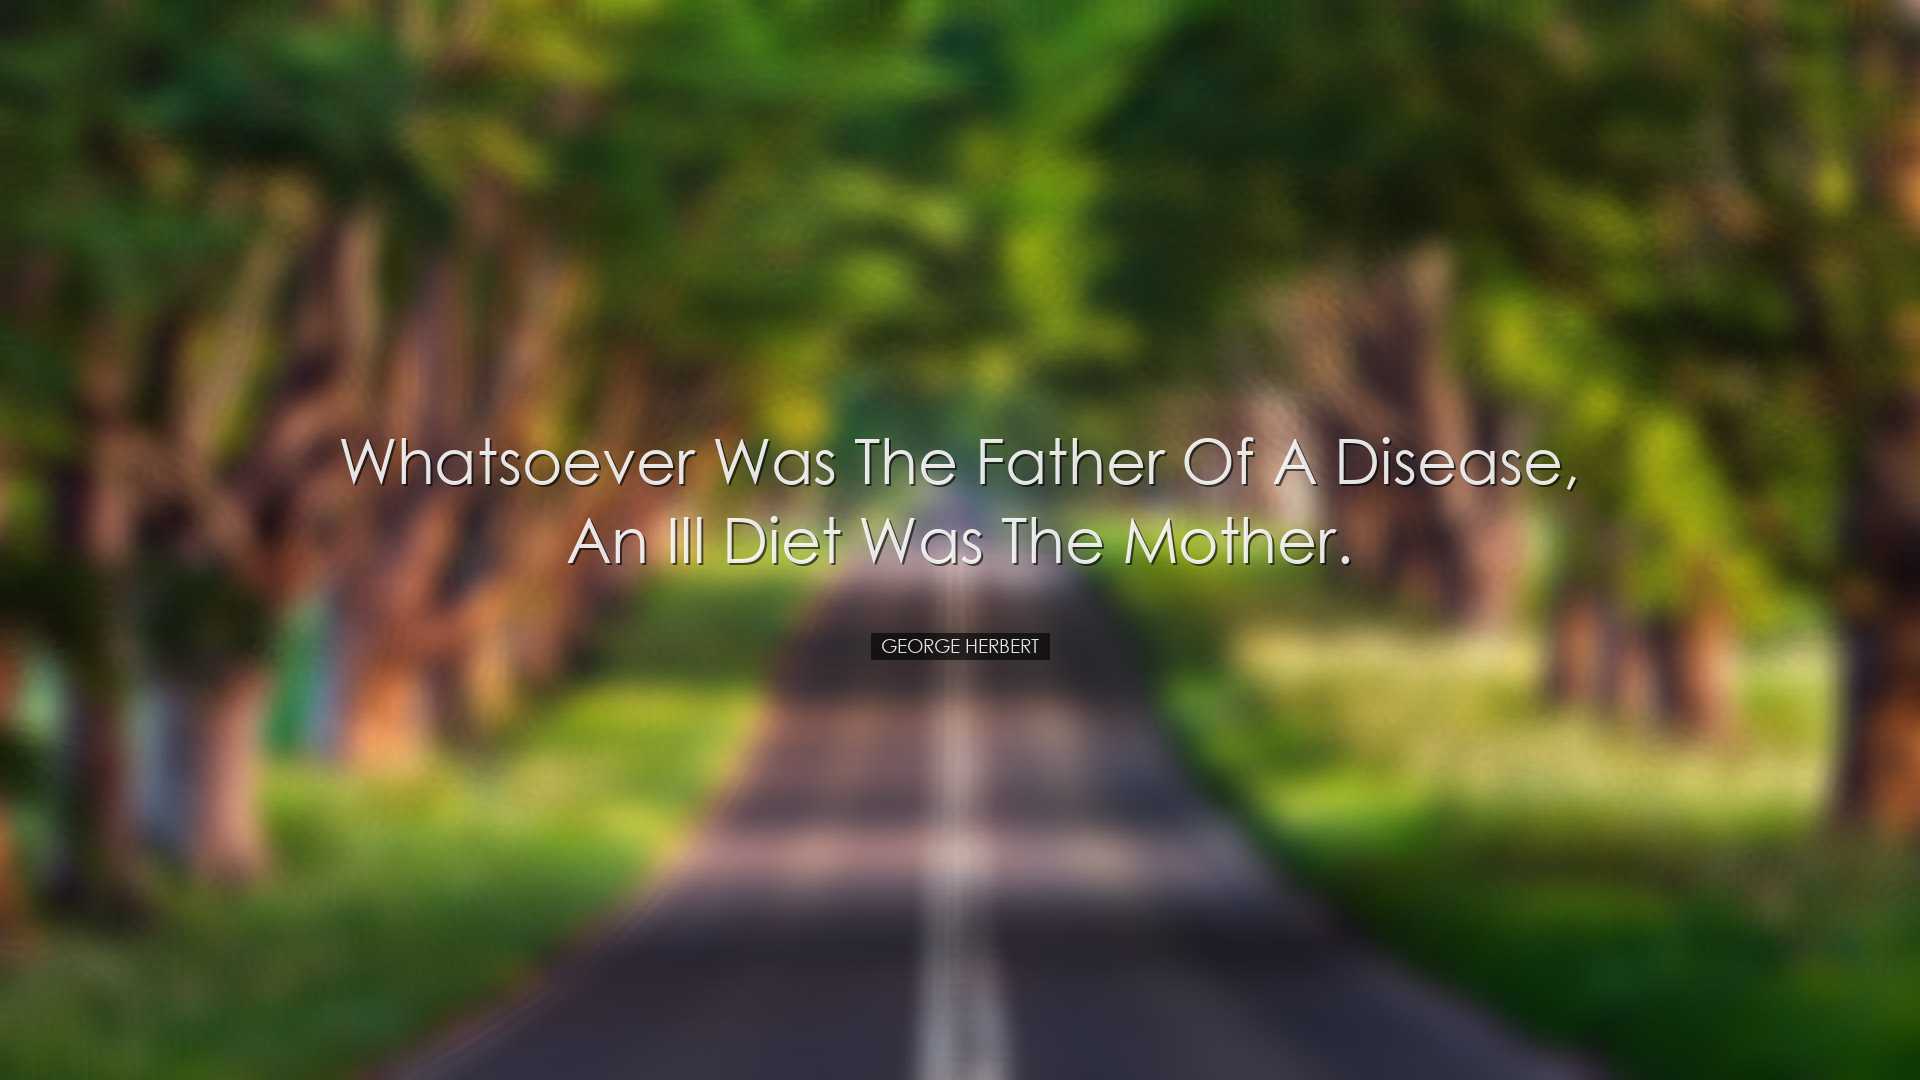 Whatsoever was the father of a disease, an ill diet was the mother